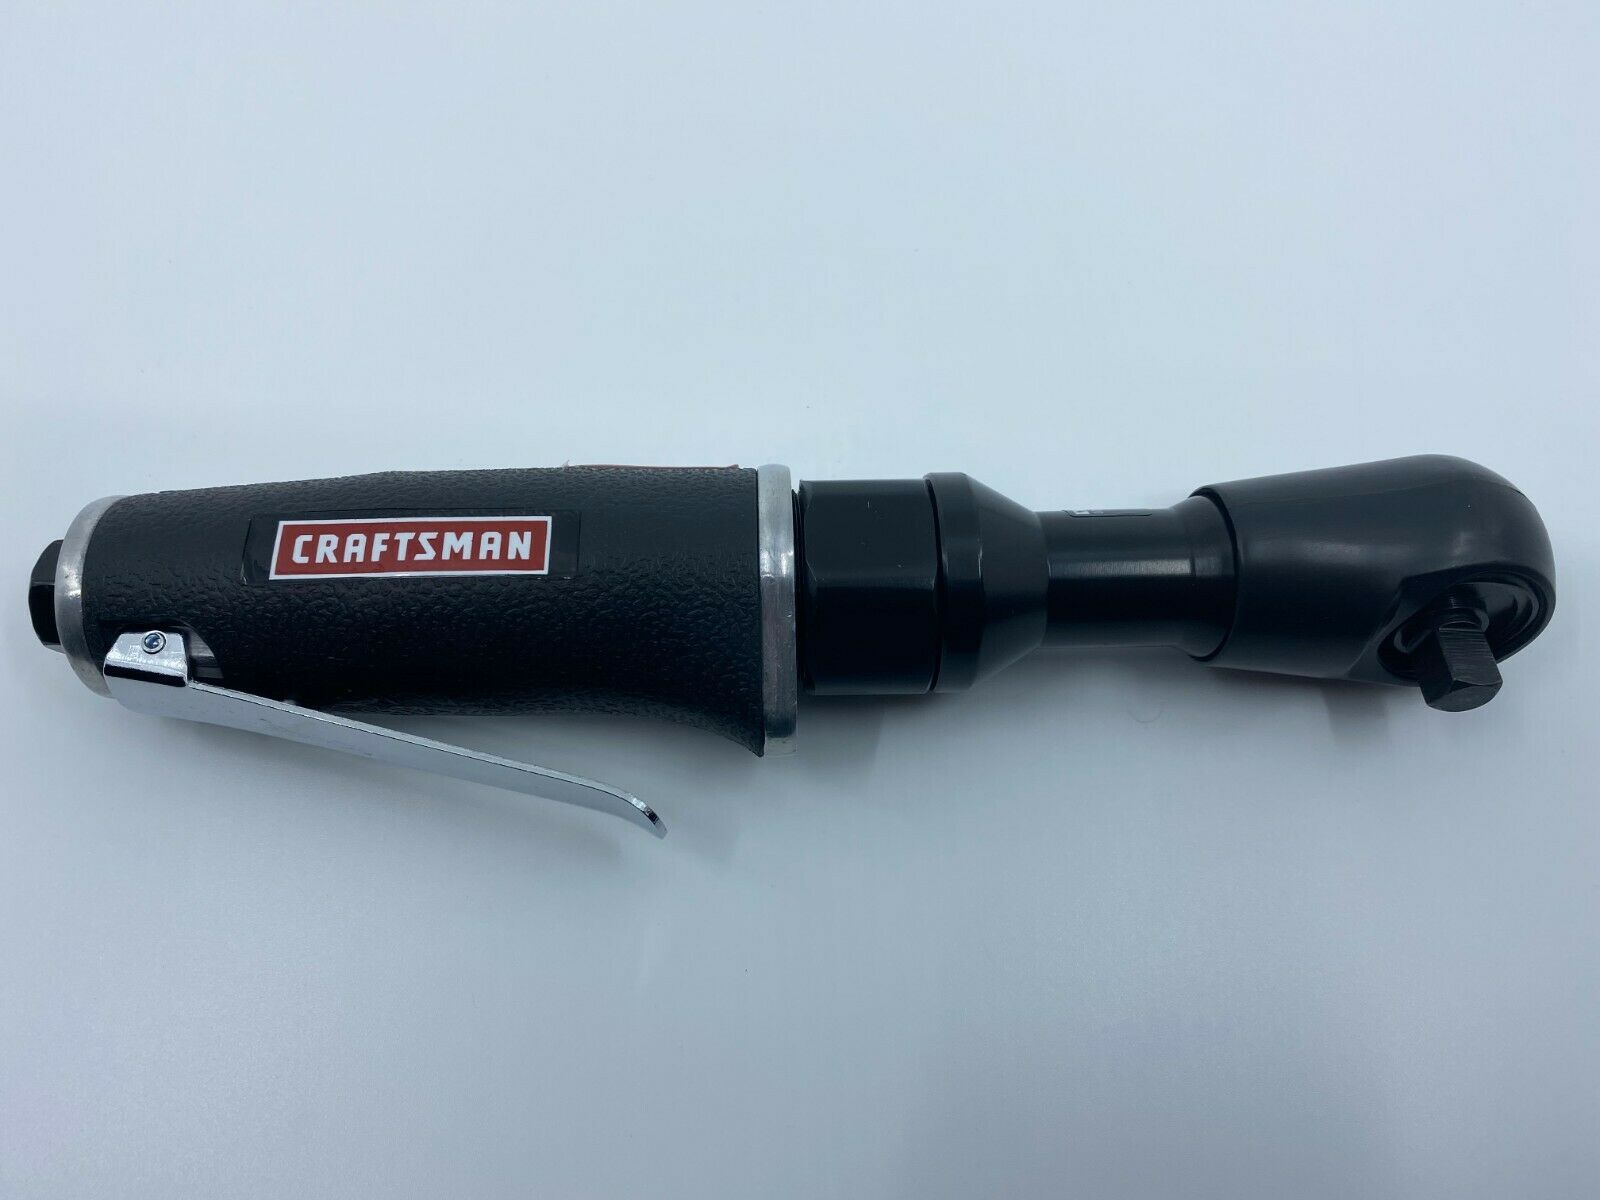 Brand New In Box Craftsman Heavy Duty Air Ratchet Wrench 919932 Free Shipping